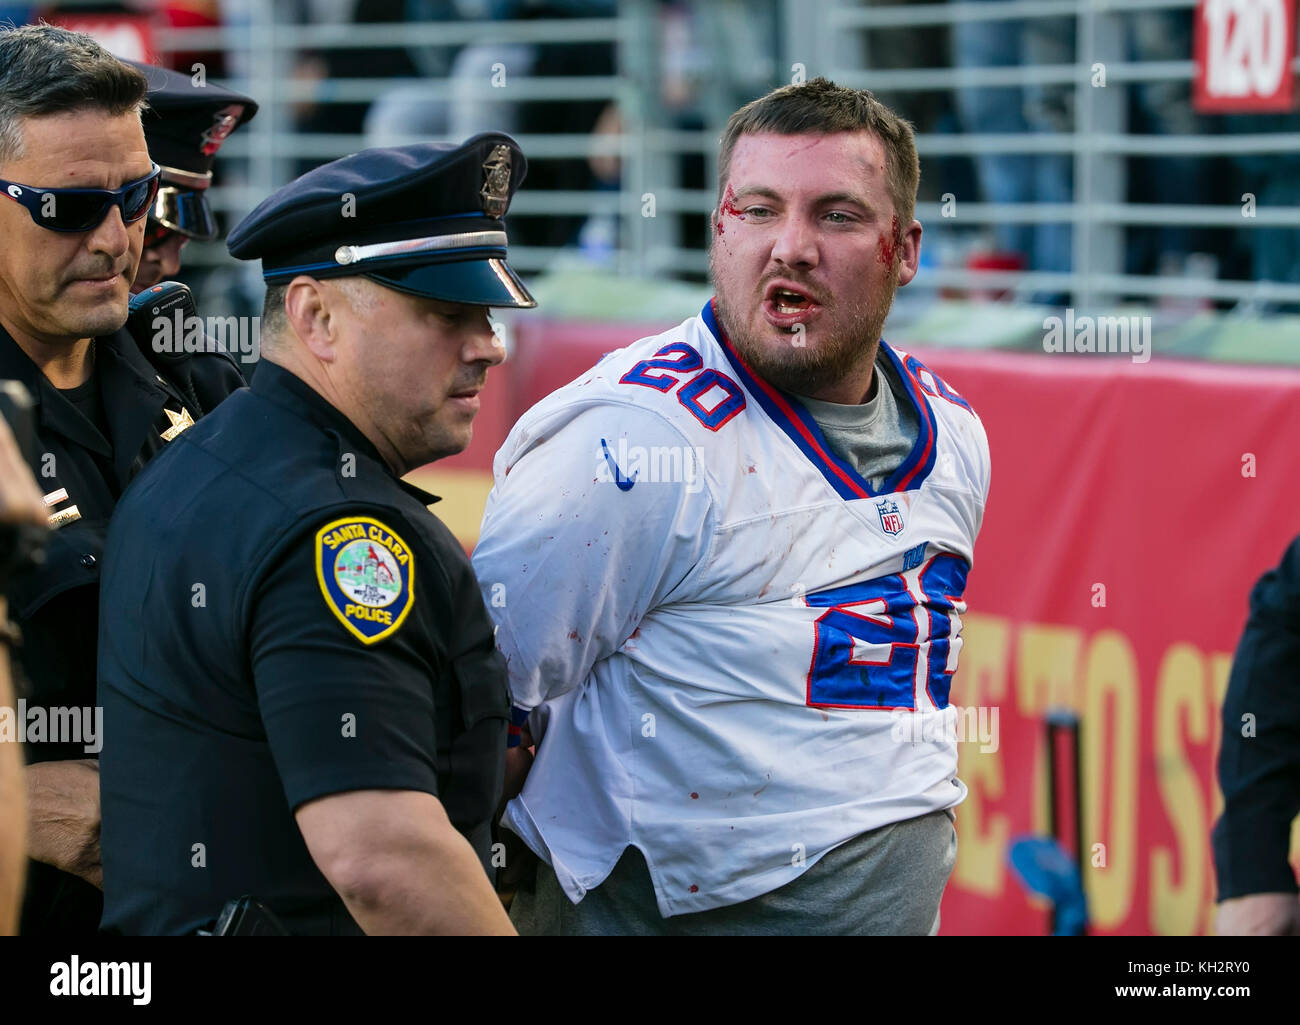 Santa Clara, CA. 12th Nov, 2017. A New York Giants fan fights with police  during the NFL football game between the New York Giants and the San  Francisco 49ers at Levi's Stadium